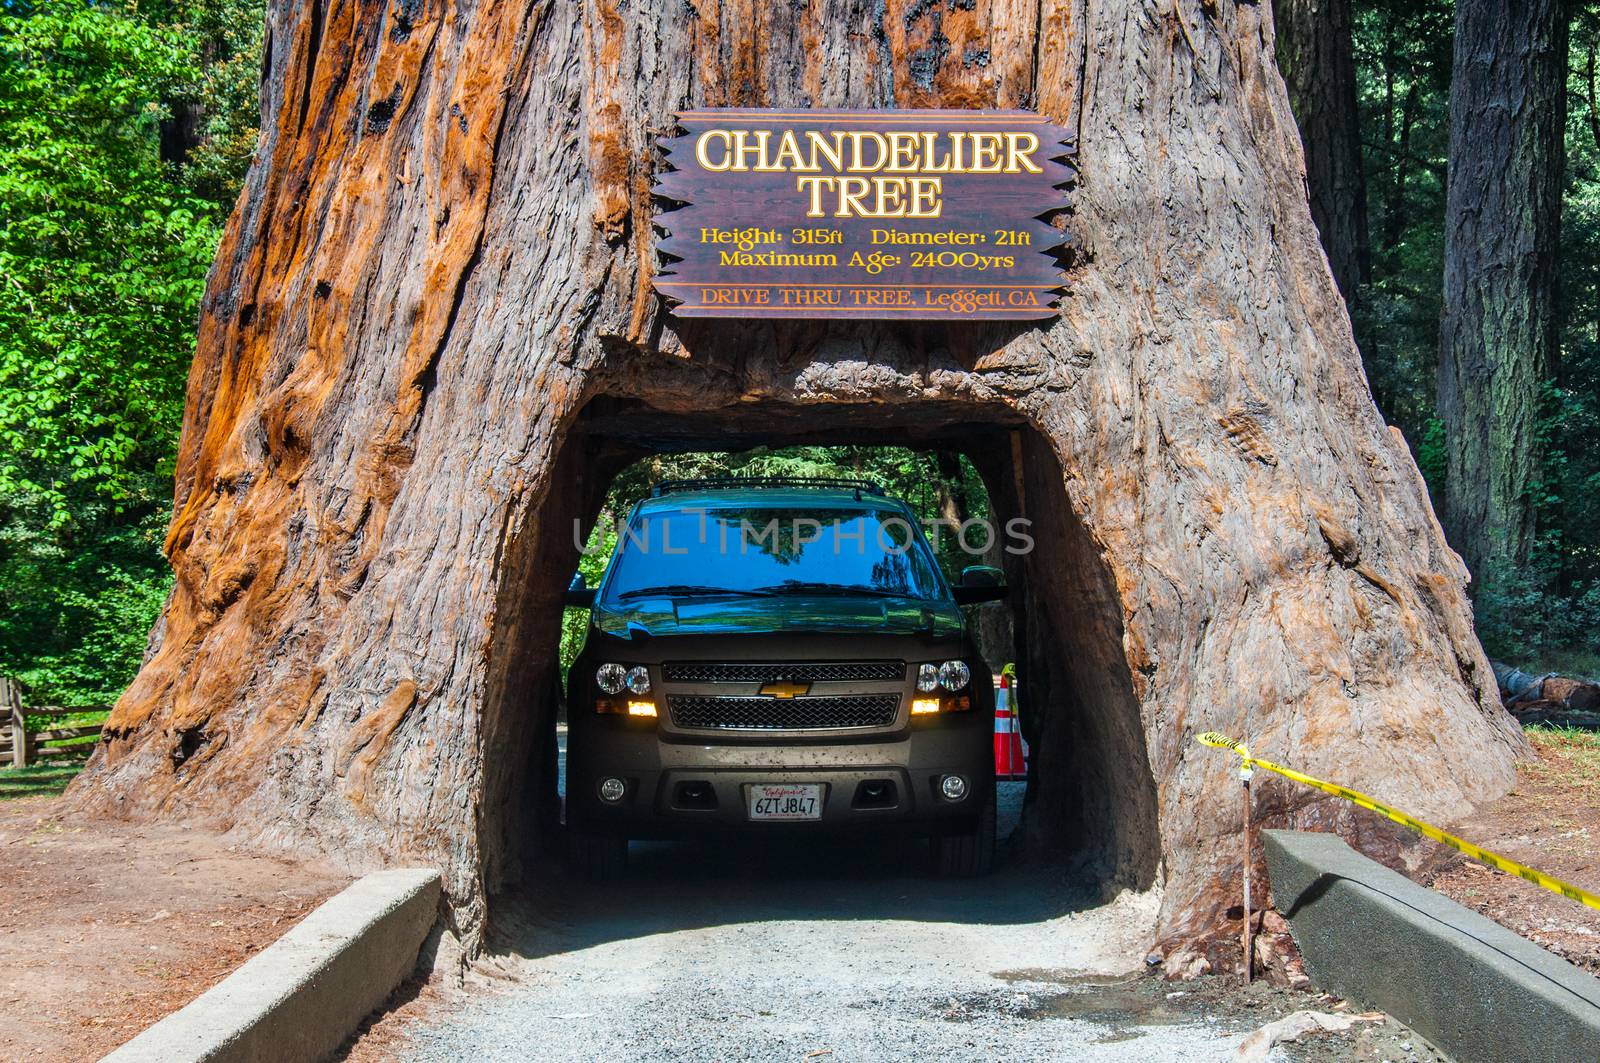 Drive through tree in the Redwood National Park by nickfox